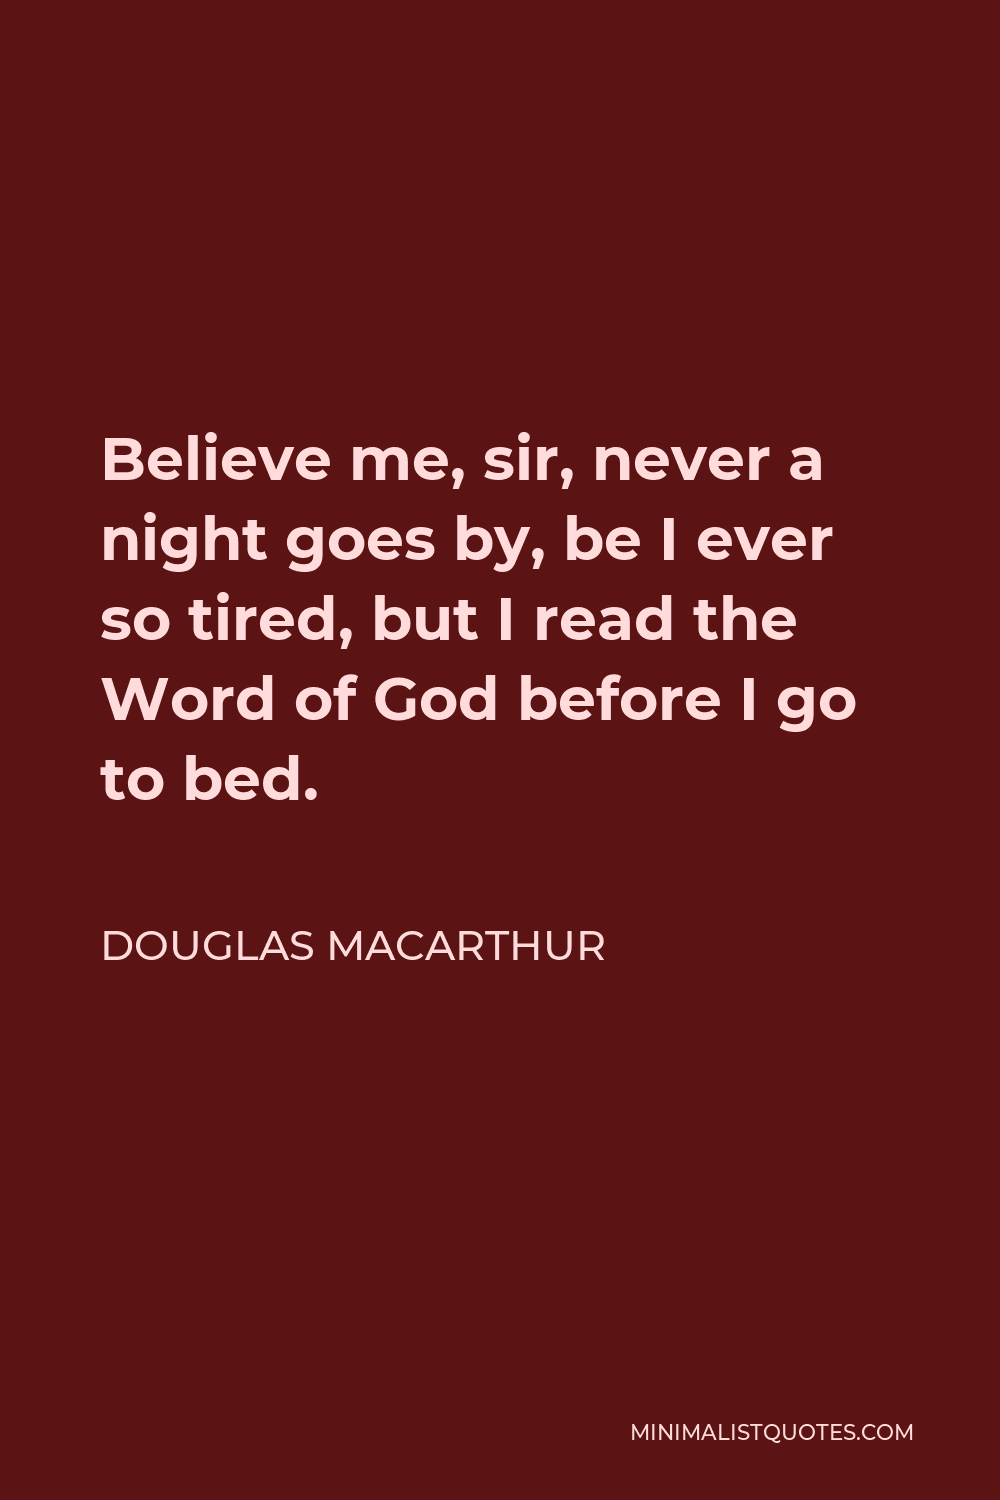 Douglas MacArthur Quote - Believe me, sir, never a night goes by, be I ever so tired, but I read the Word of God before I go to bed.